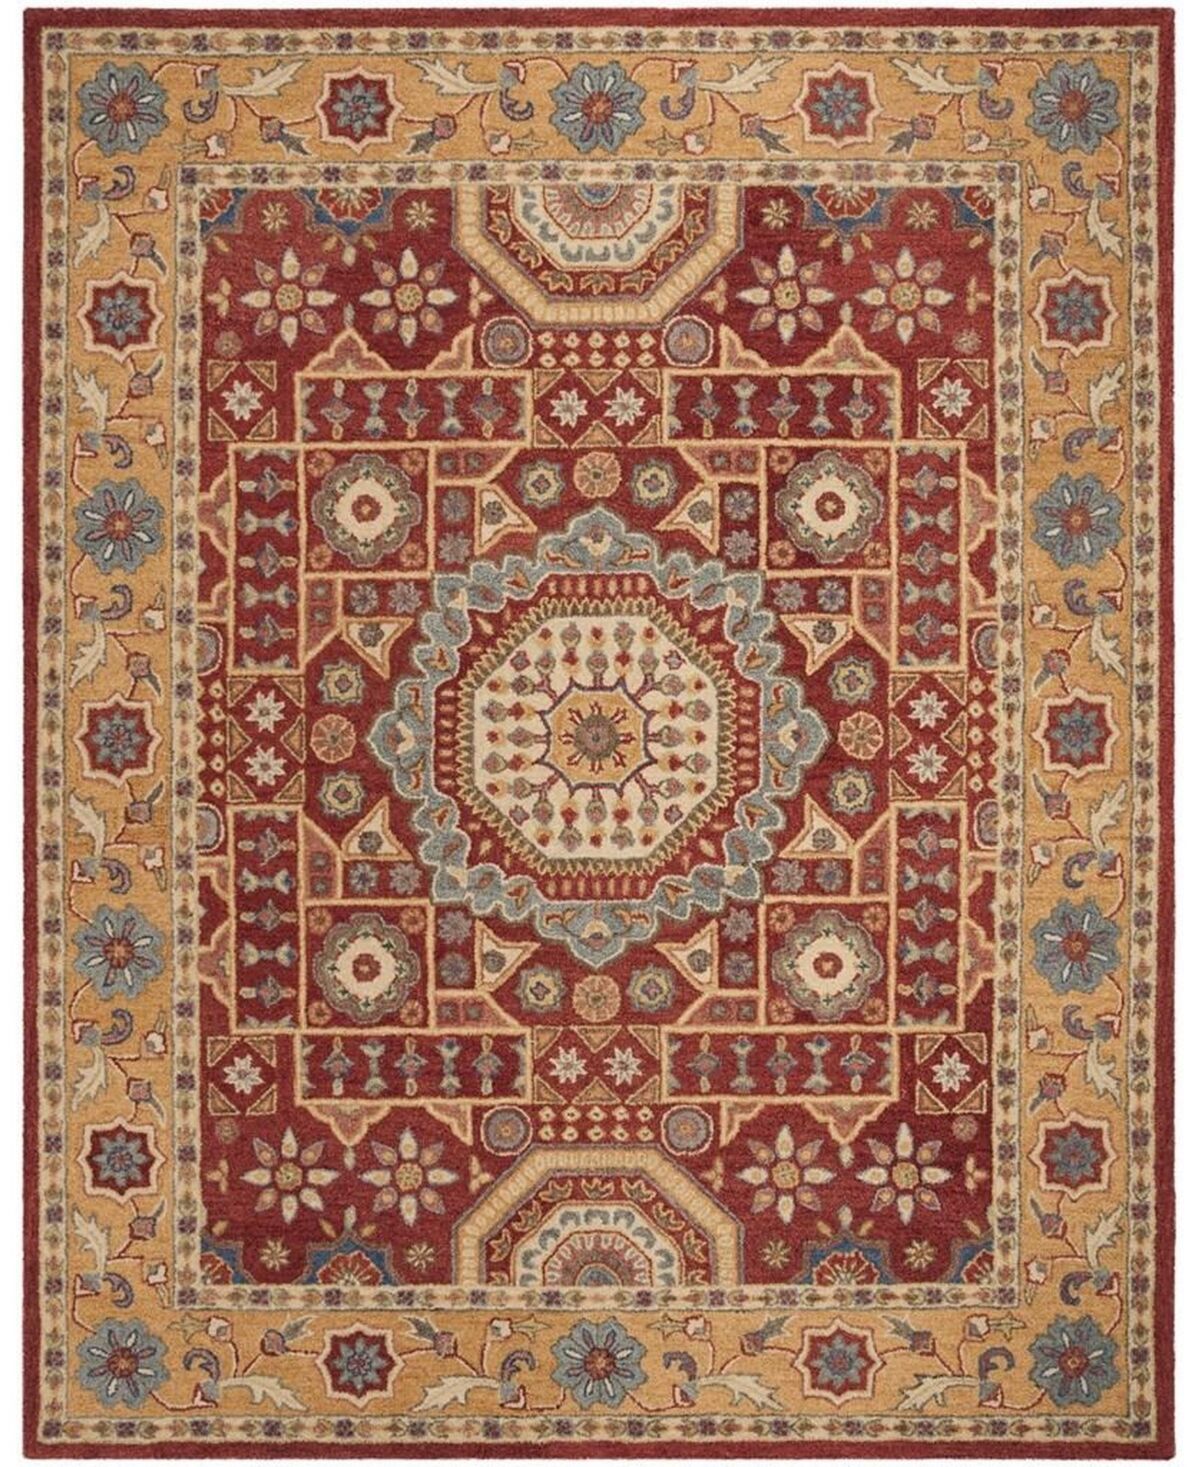 Safavieh Antiquity At501 Red and Orange 8' x 10' Area Rug - Red